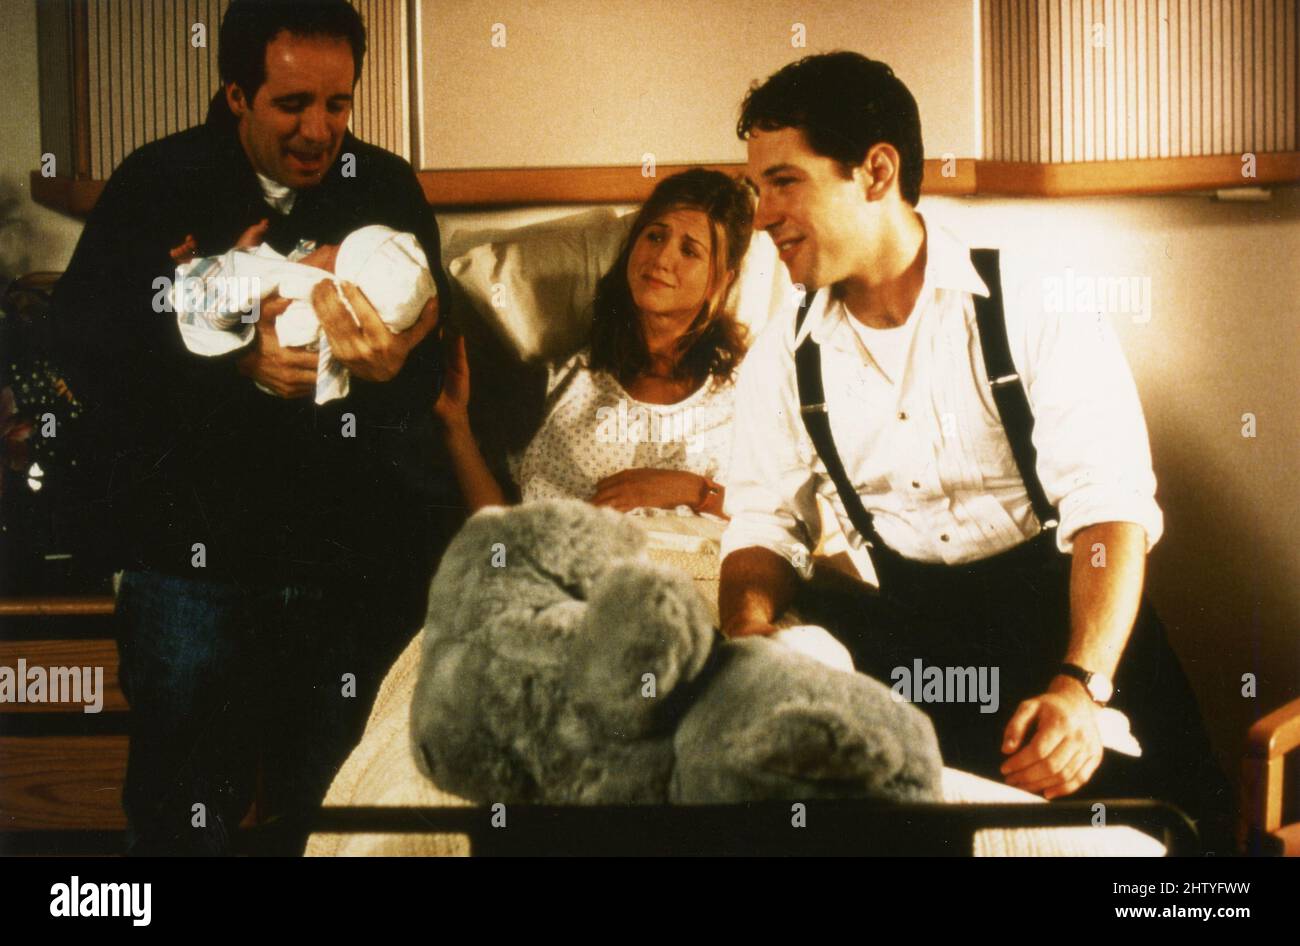 Actors Paul Reiser, Greg Evigan, and Staci Keanan in the TV series My Two Dads, USA 1987 Stock Photo